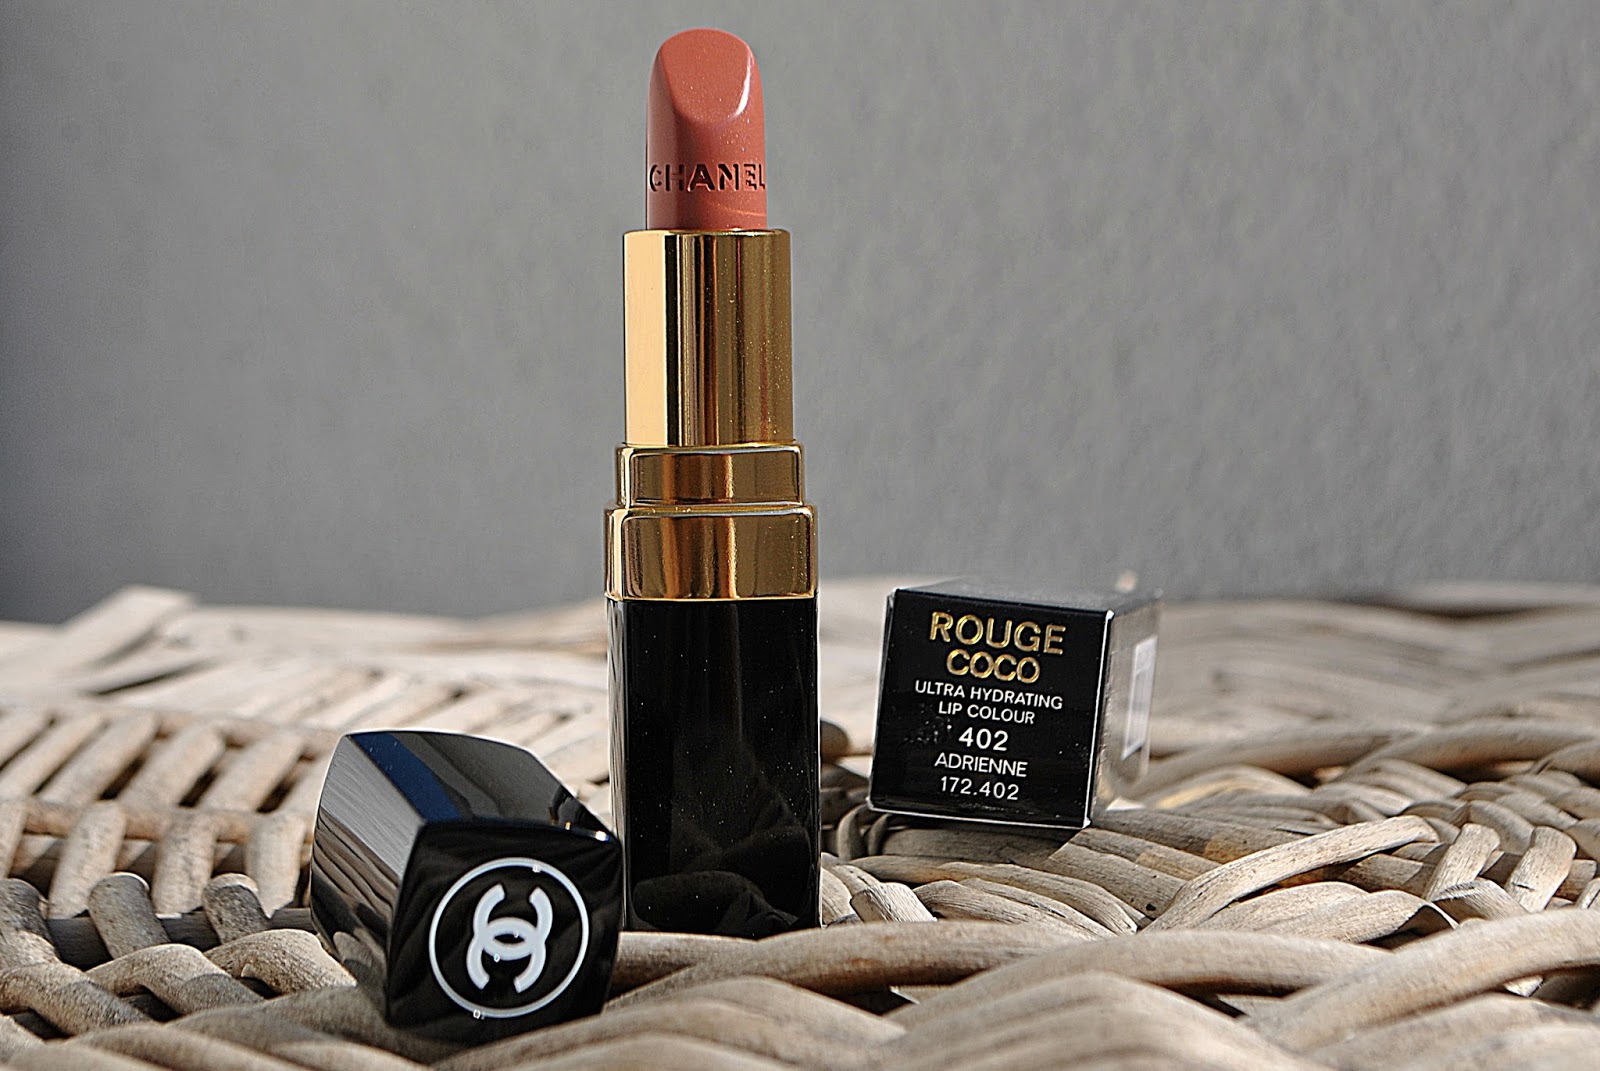 CHANEL ROUGE COCO 402 ADRIENNE